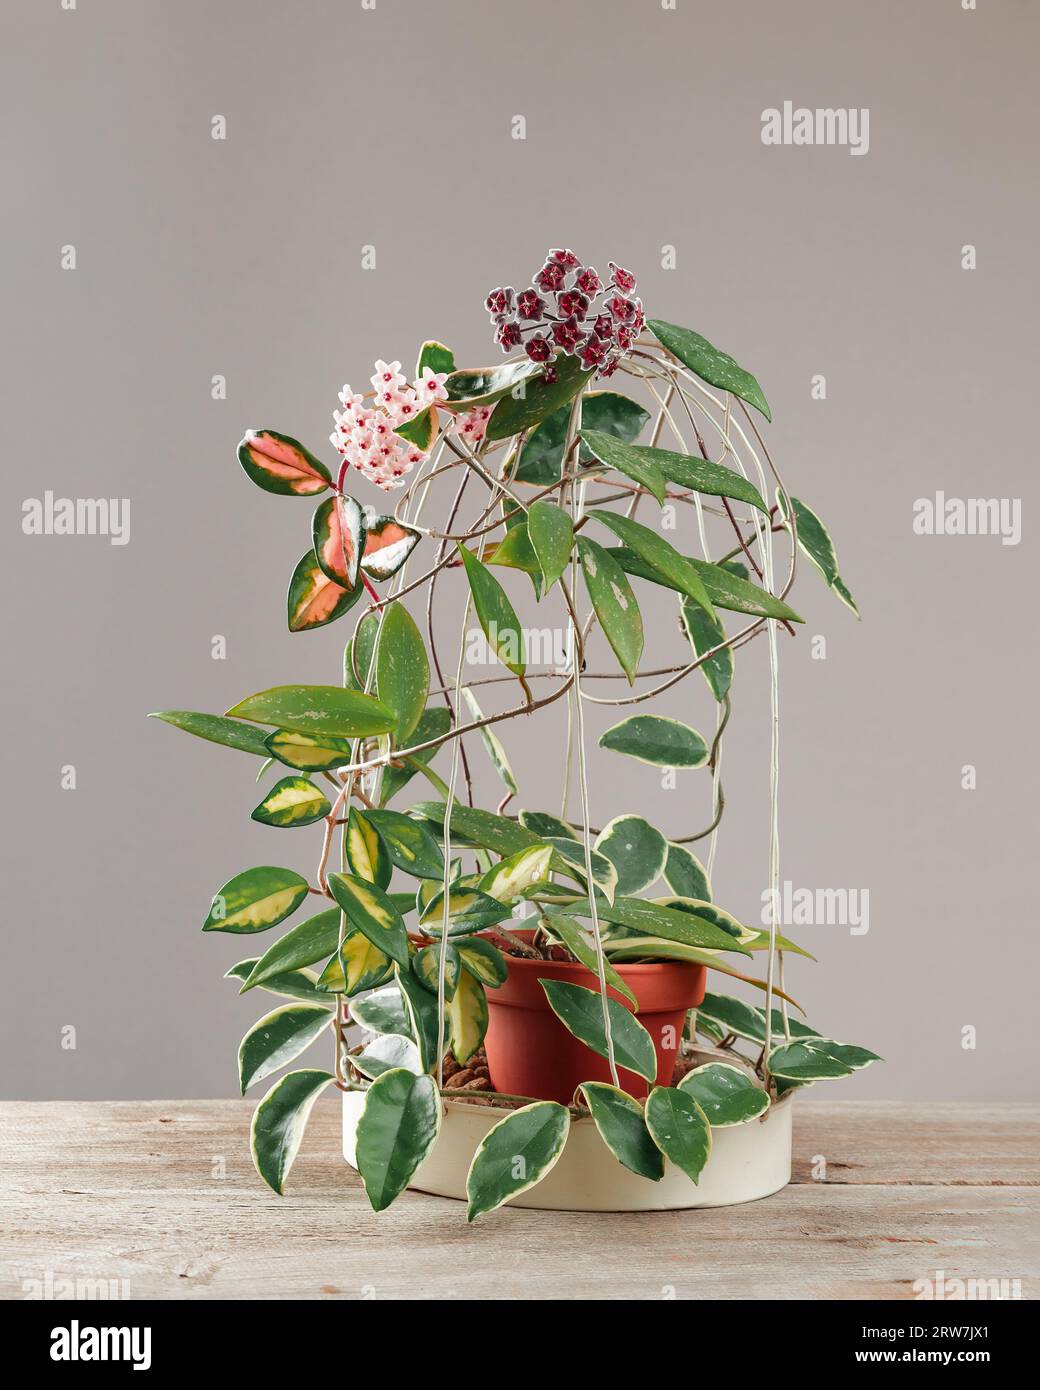 Hoya Carnosa and Hoya Pubicalyx Potted Plant. Different Varieties of Hoya, Krimson Princess and Krimson Queen Species in Bloom. Porcelain flower or wa Stock Photo